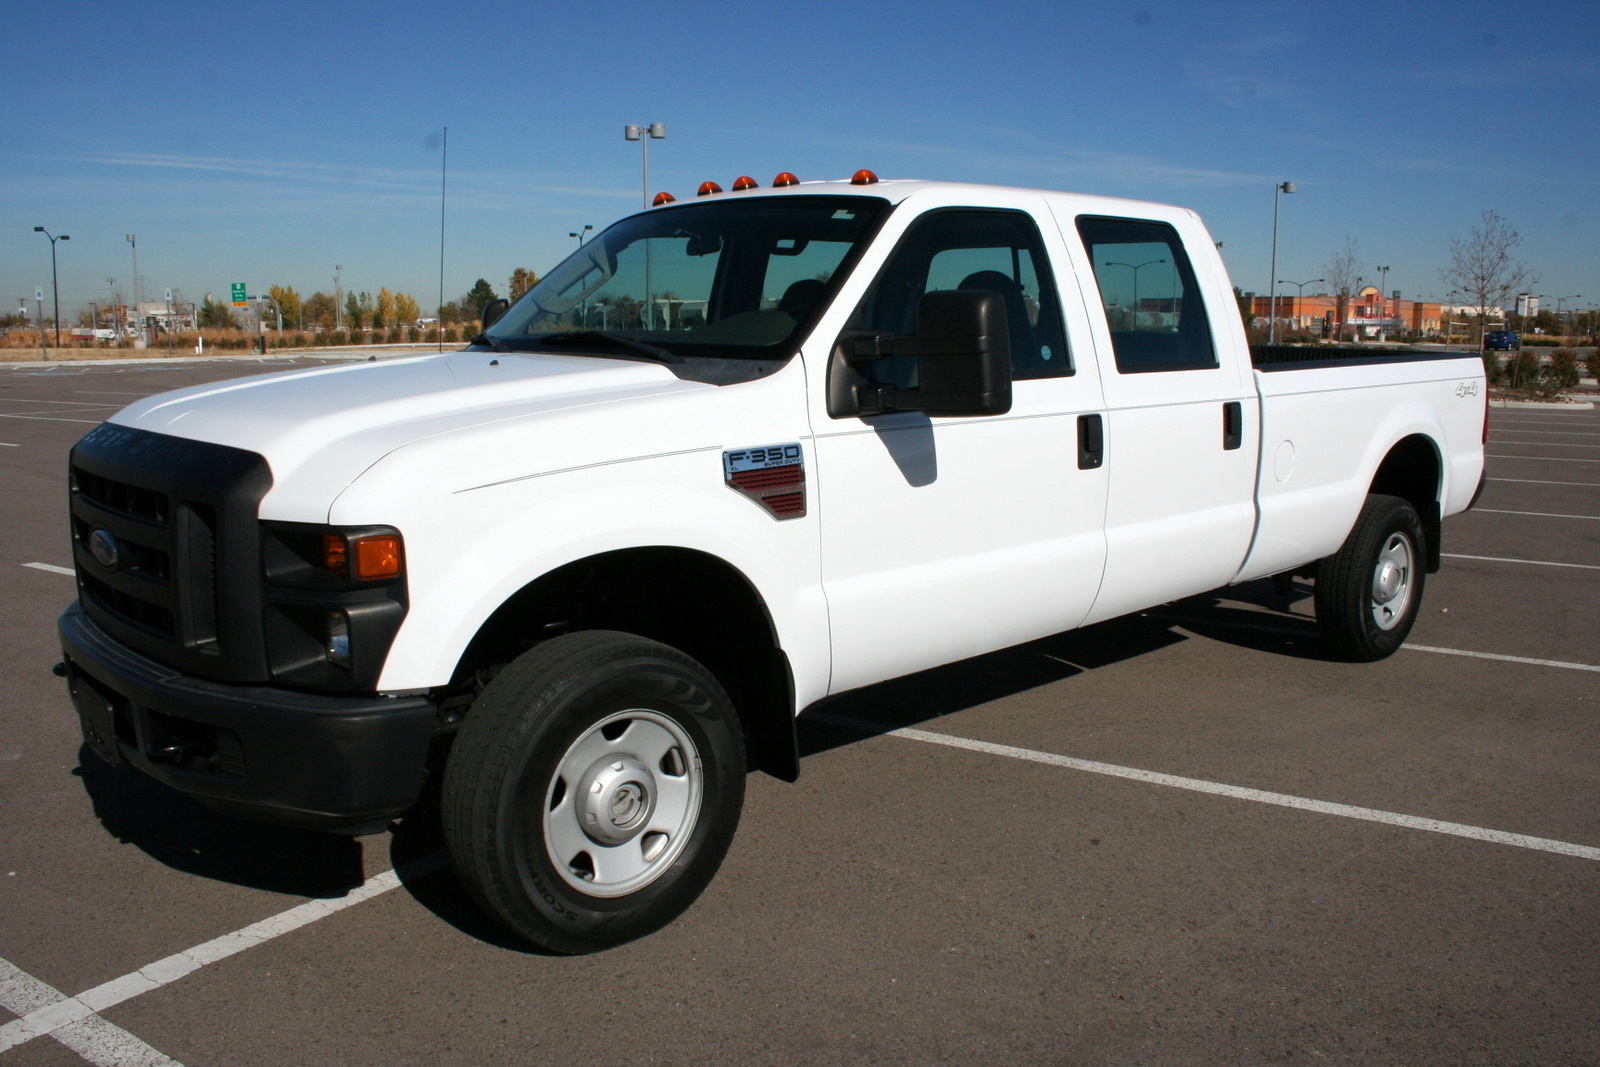 Recall on the 2008 ford f350 super duty